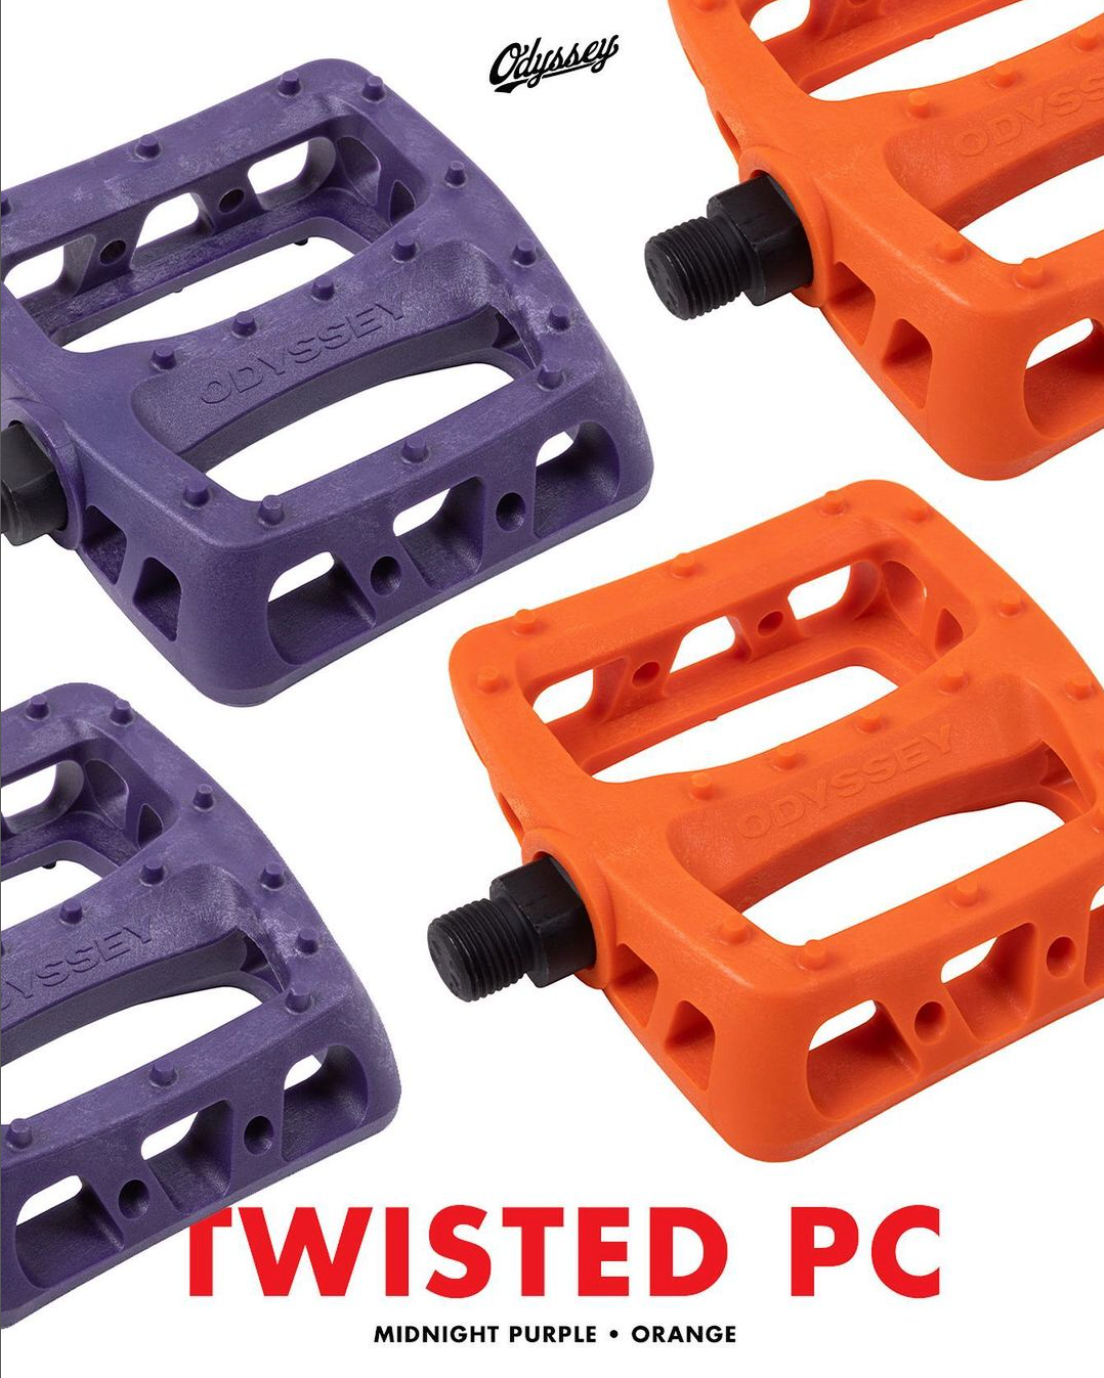 odyssey twisted pc pedals midnight purple or orange